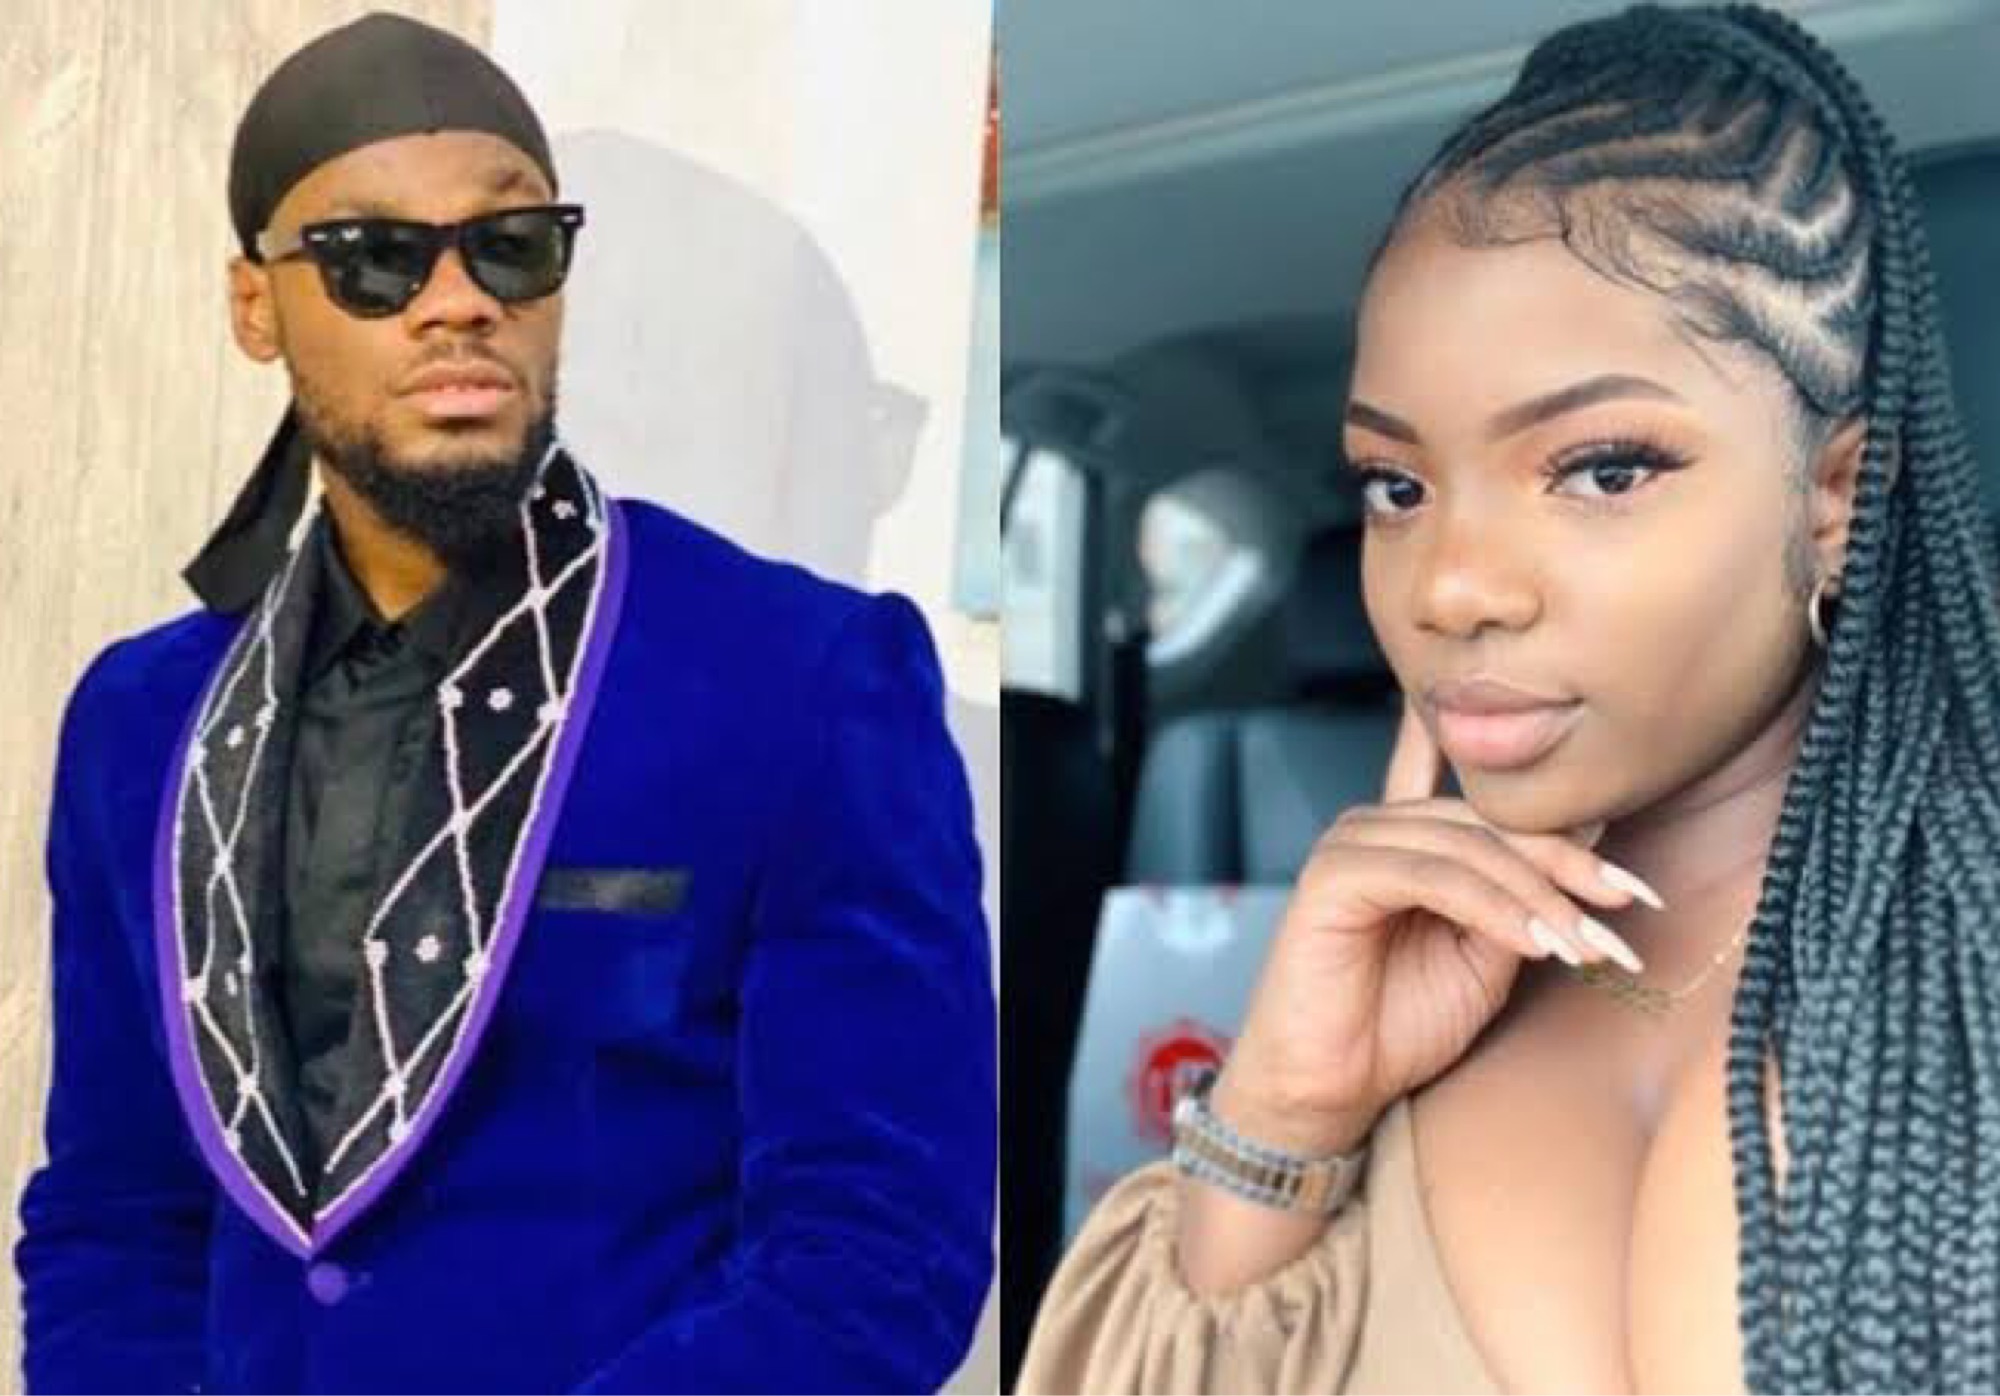 “You Are True Definition Of A Queen” - BBNaija’s Prince Tells Dorathy On Her 25th Birthday